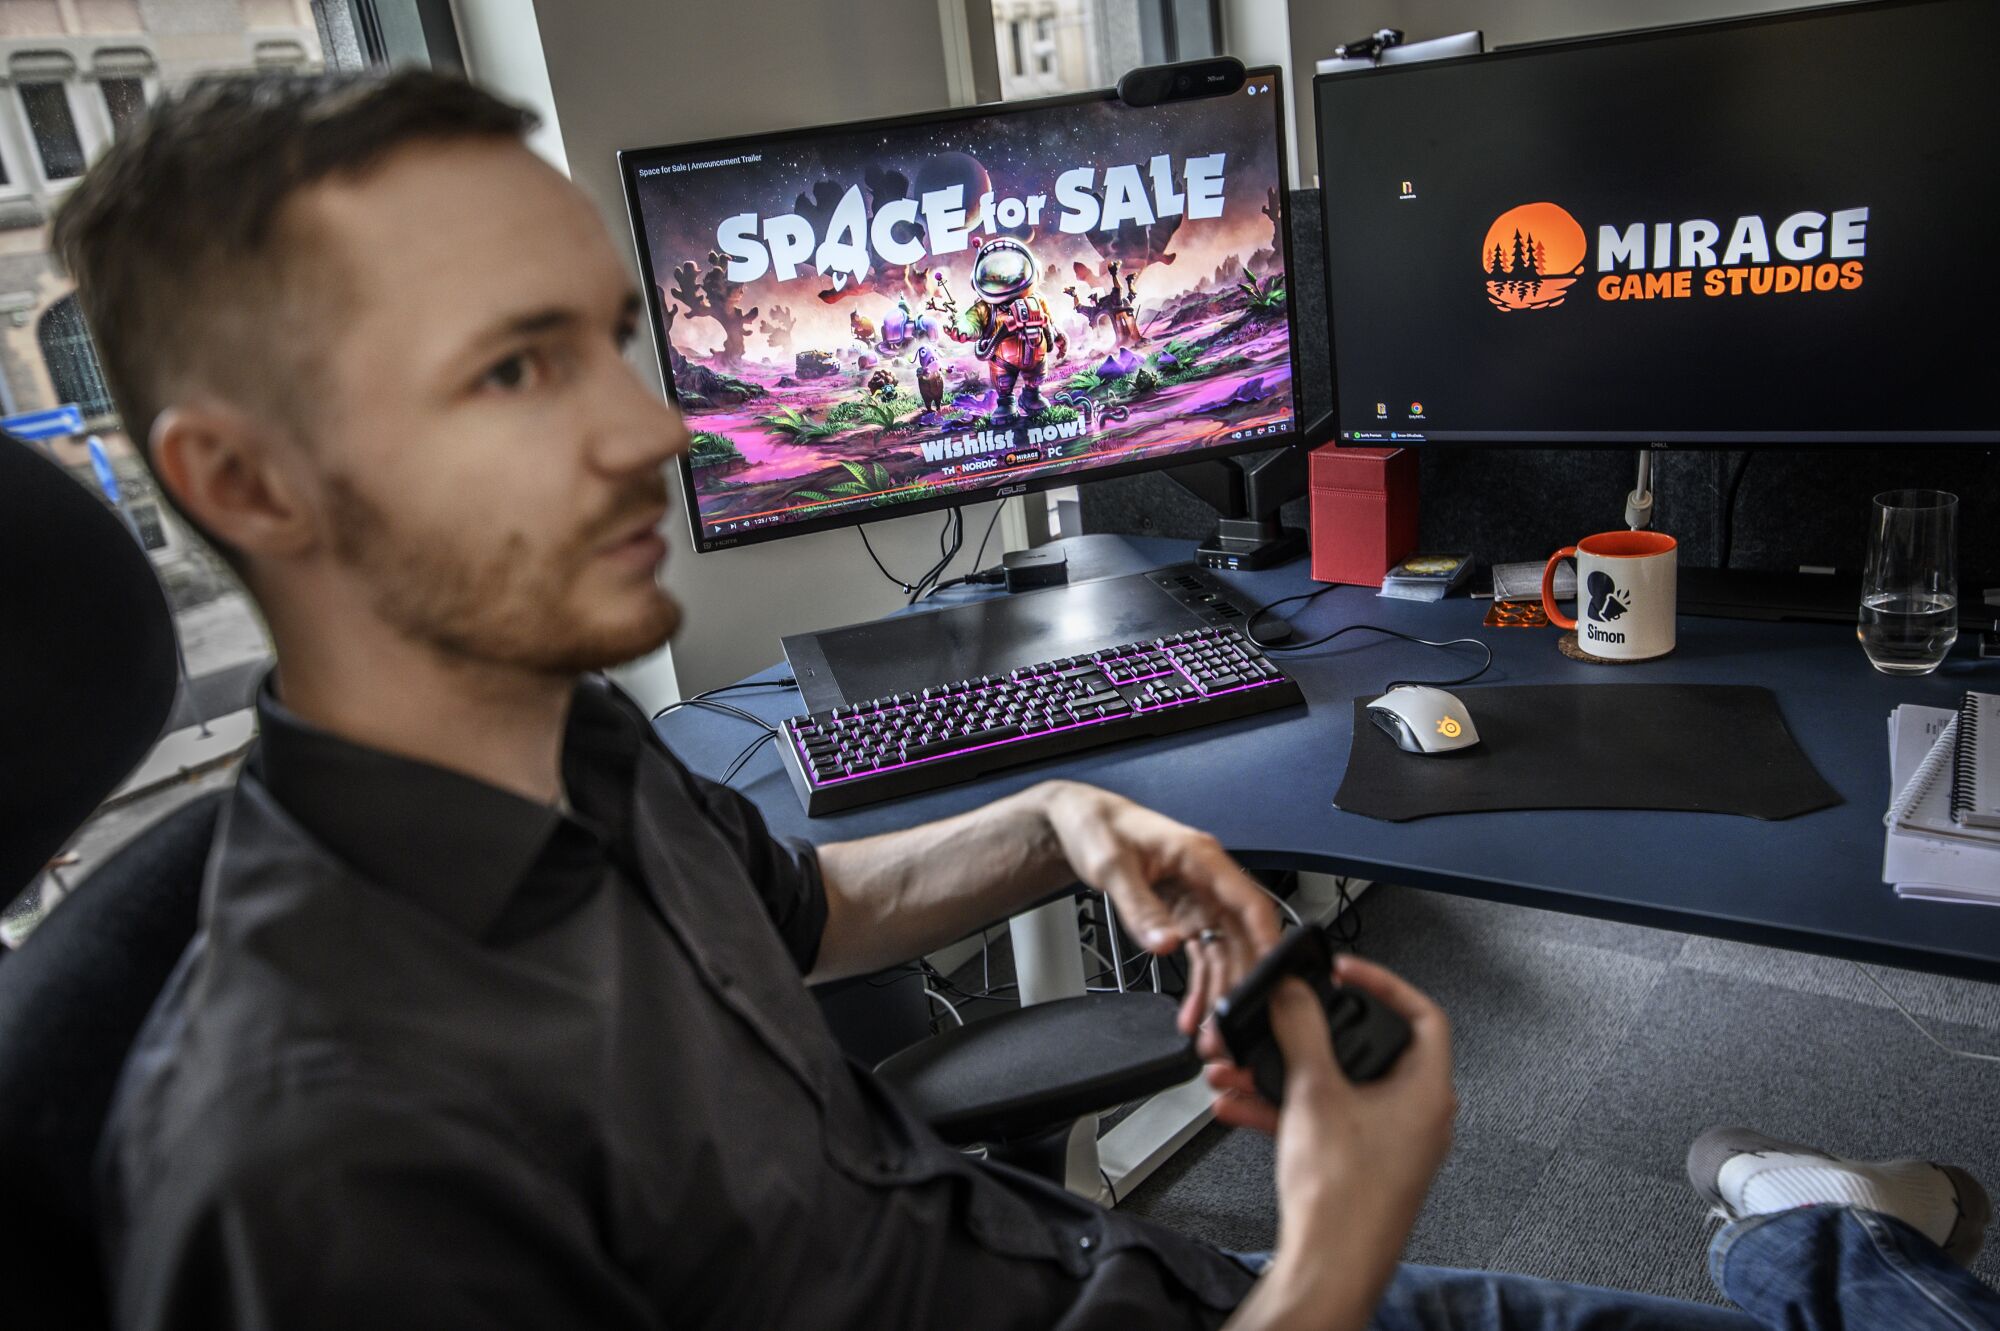 A man in a dark shirt sitting at a desk with two computer screens; one says Space for Sale, the other, Mirage Game Studios